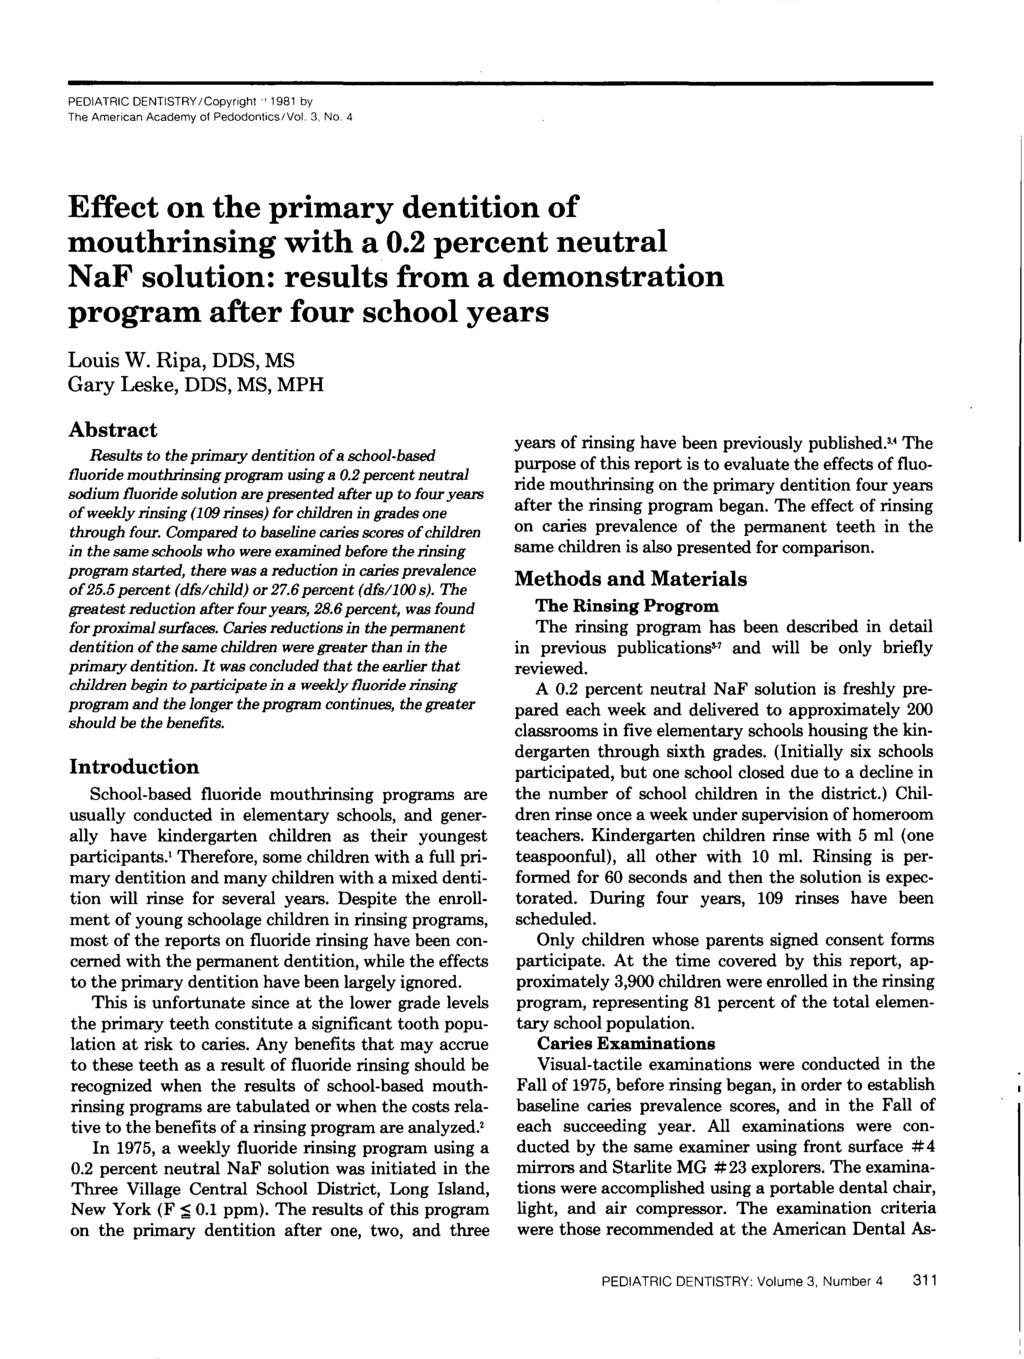 PEDIATRIC DENTiSTRY/Copyright " 1981 by The American Academy of Pedodontics/Vol. 3, No. 4 Effect on the primary dentition of mouthrinsing with a 0.